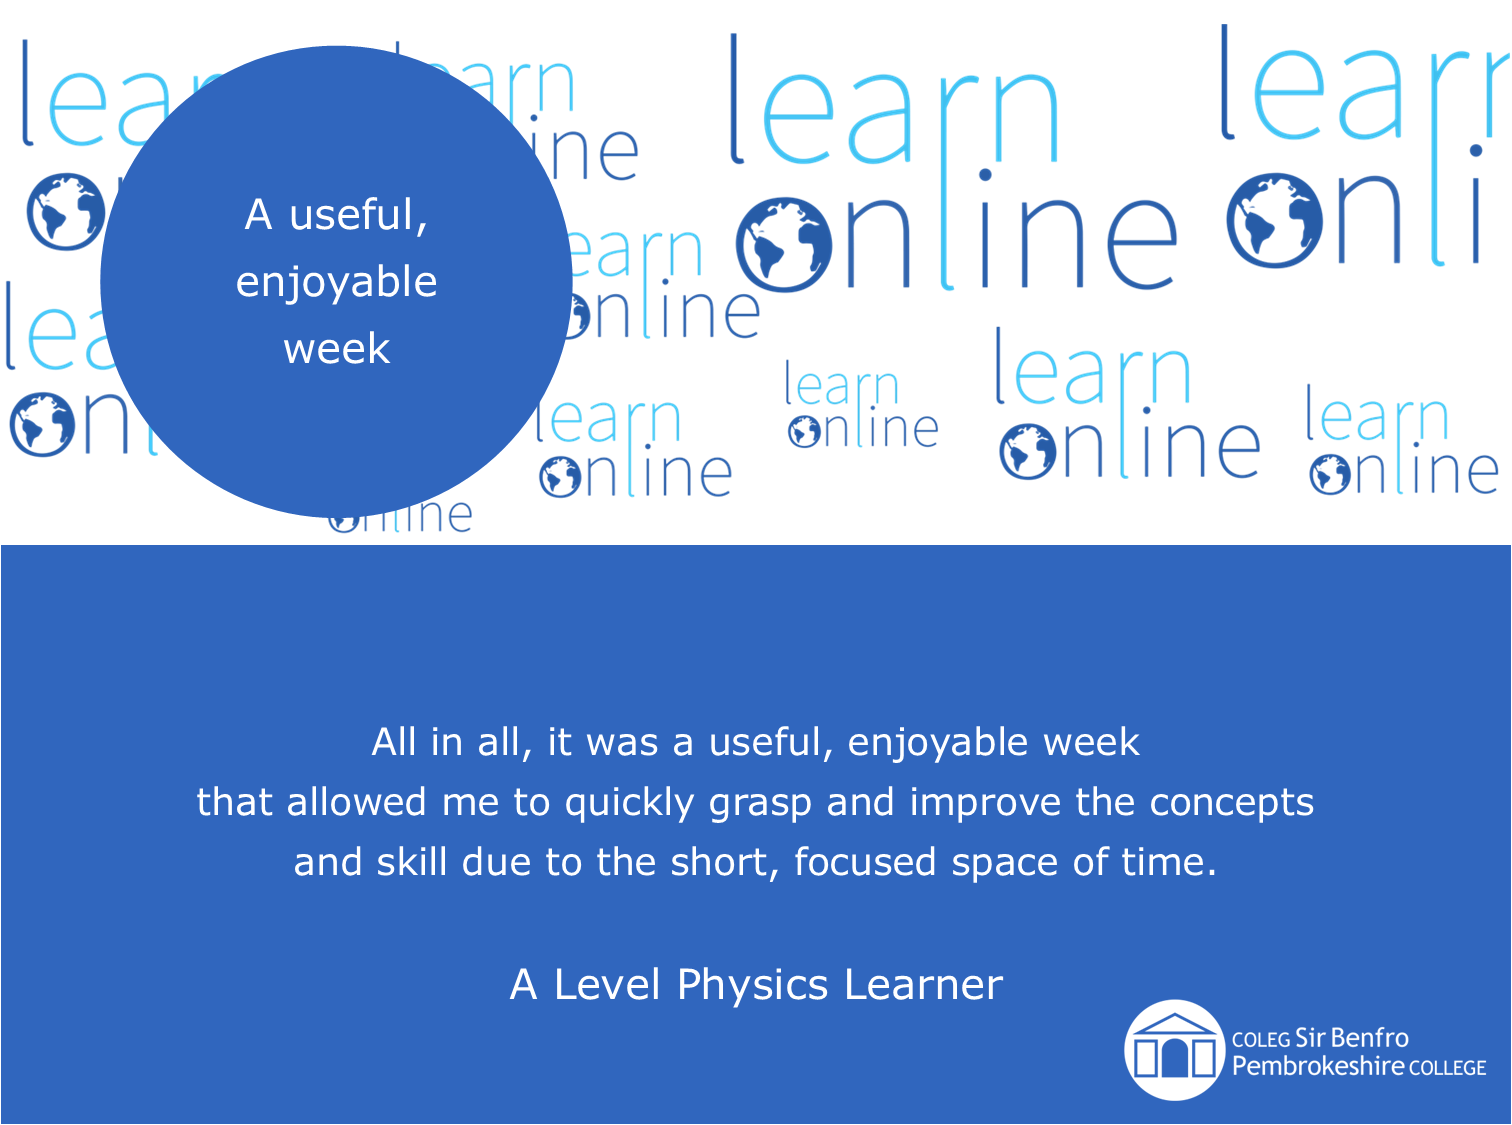 All in all, it was a useful, enjoyable week that allowed me to quickly grasp and improve the concepts and skill due to the short, focused space of time. A Level Physics Learner